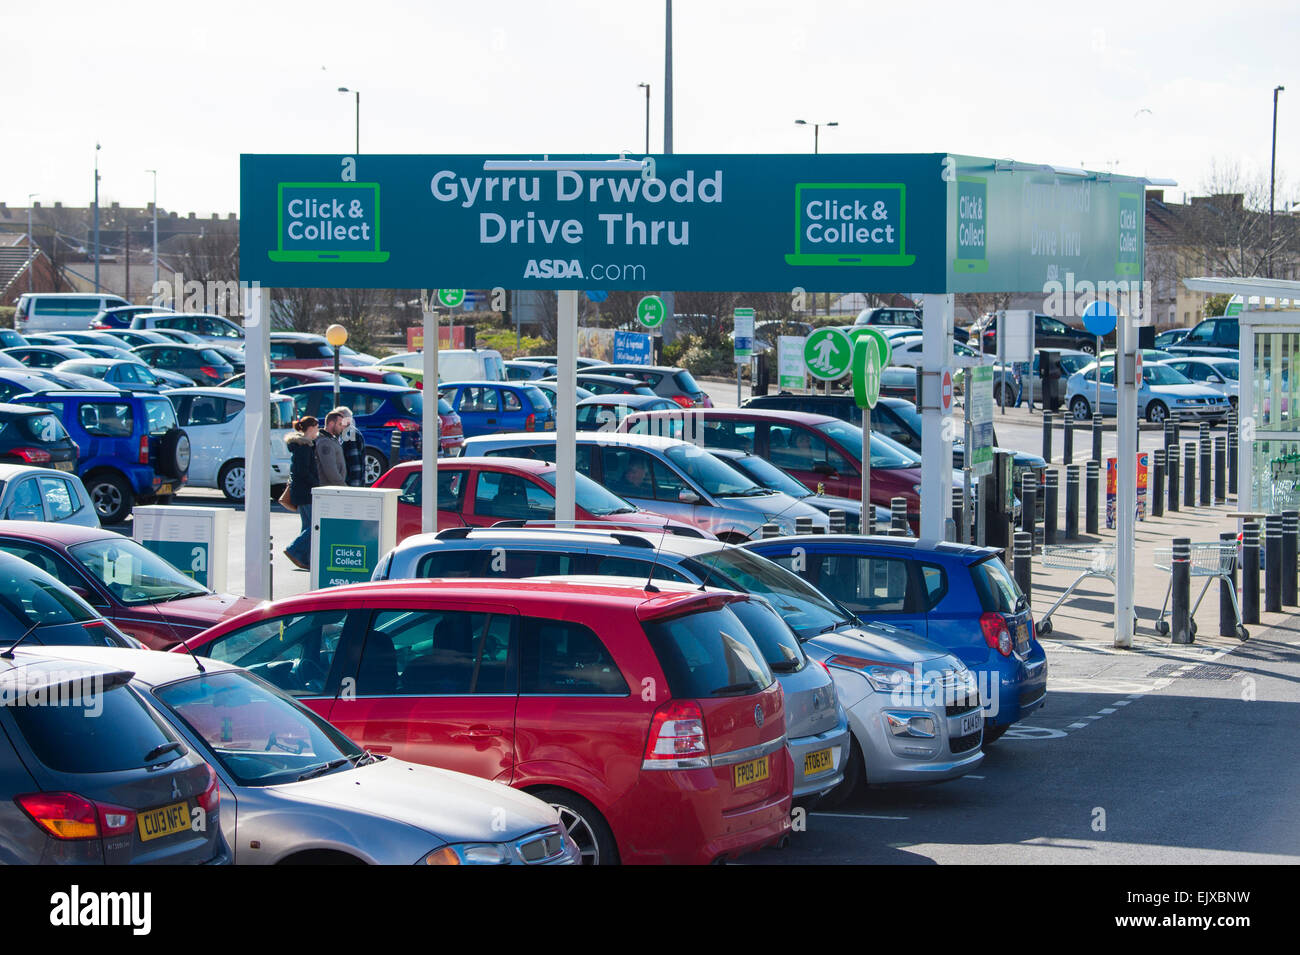 Bilingual welsh english language signage on the 'Drive Thru / Gyrru Drwodd'  click and collect  shop and drive service at the ASDA supermarket, Llanelli town centre, Wales UK Stock Photo